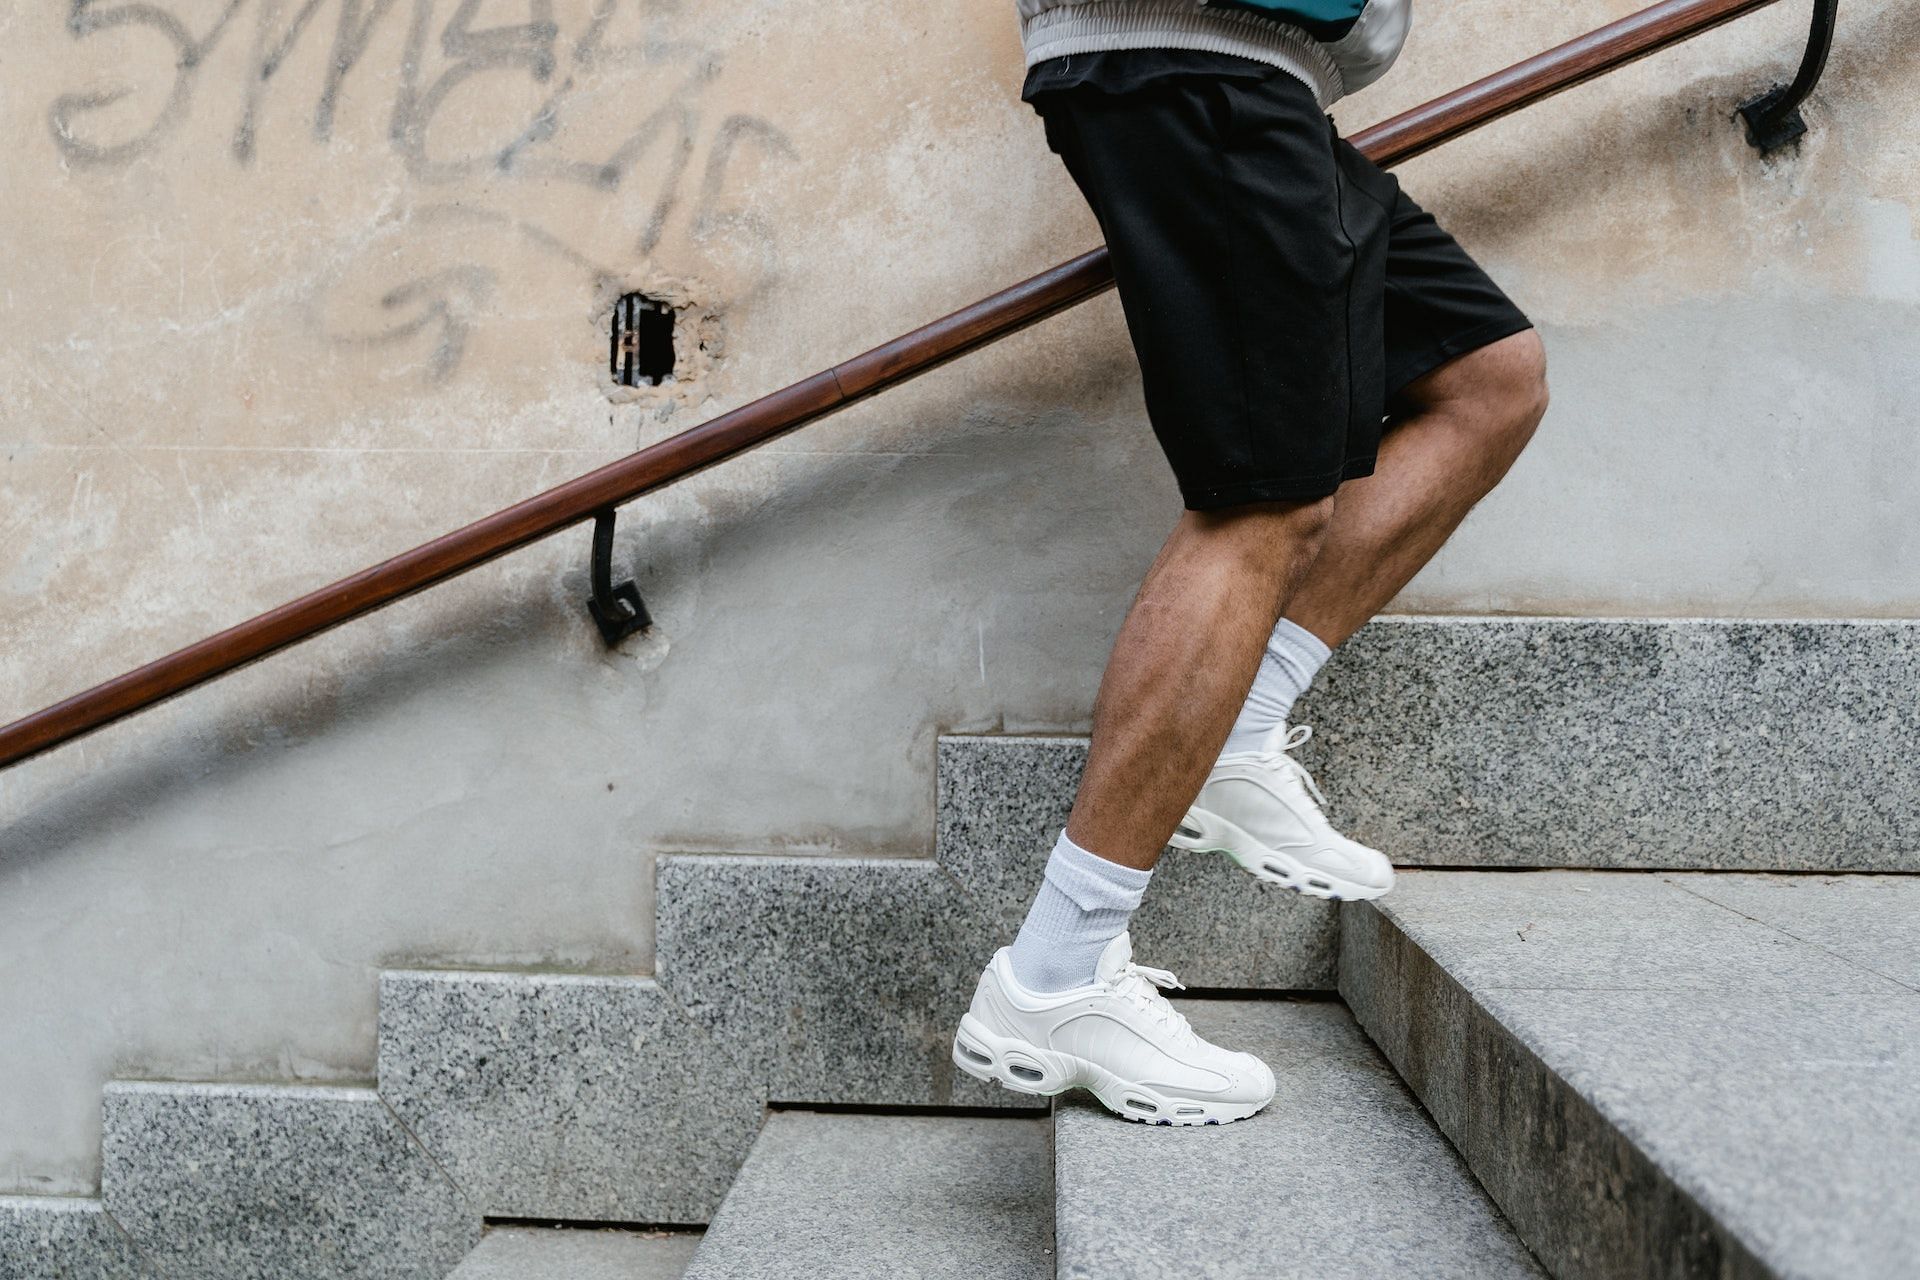 Climbing stairs for strengthening muscles. (Image via Pexels/ Mart Production)